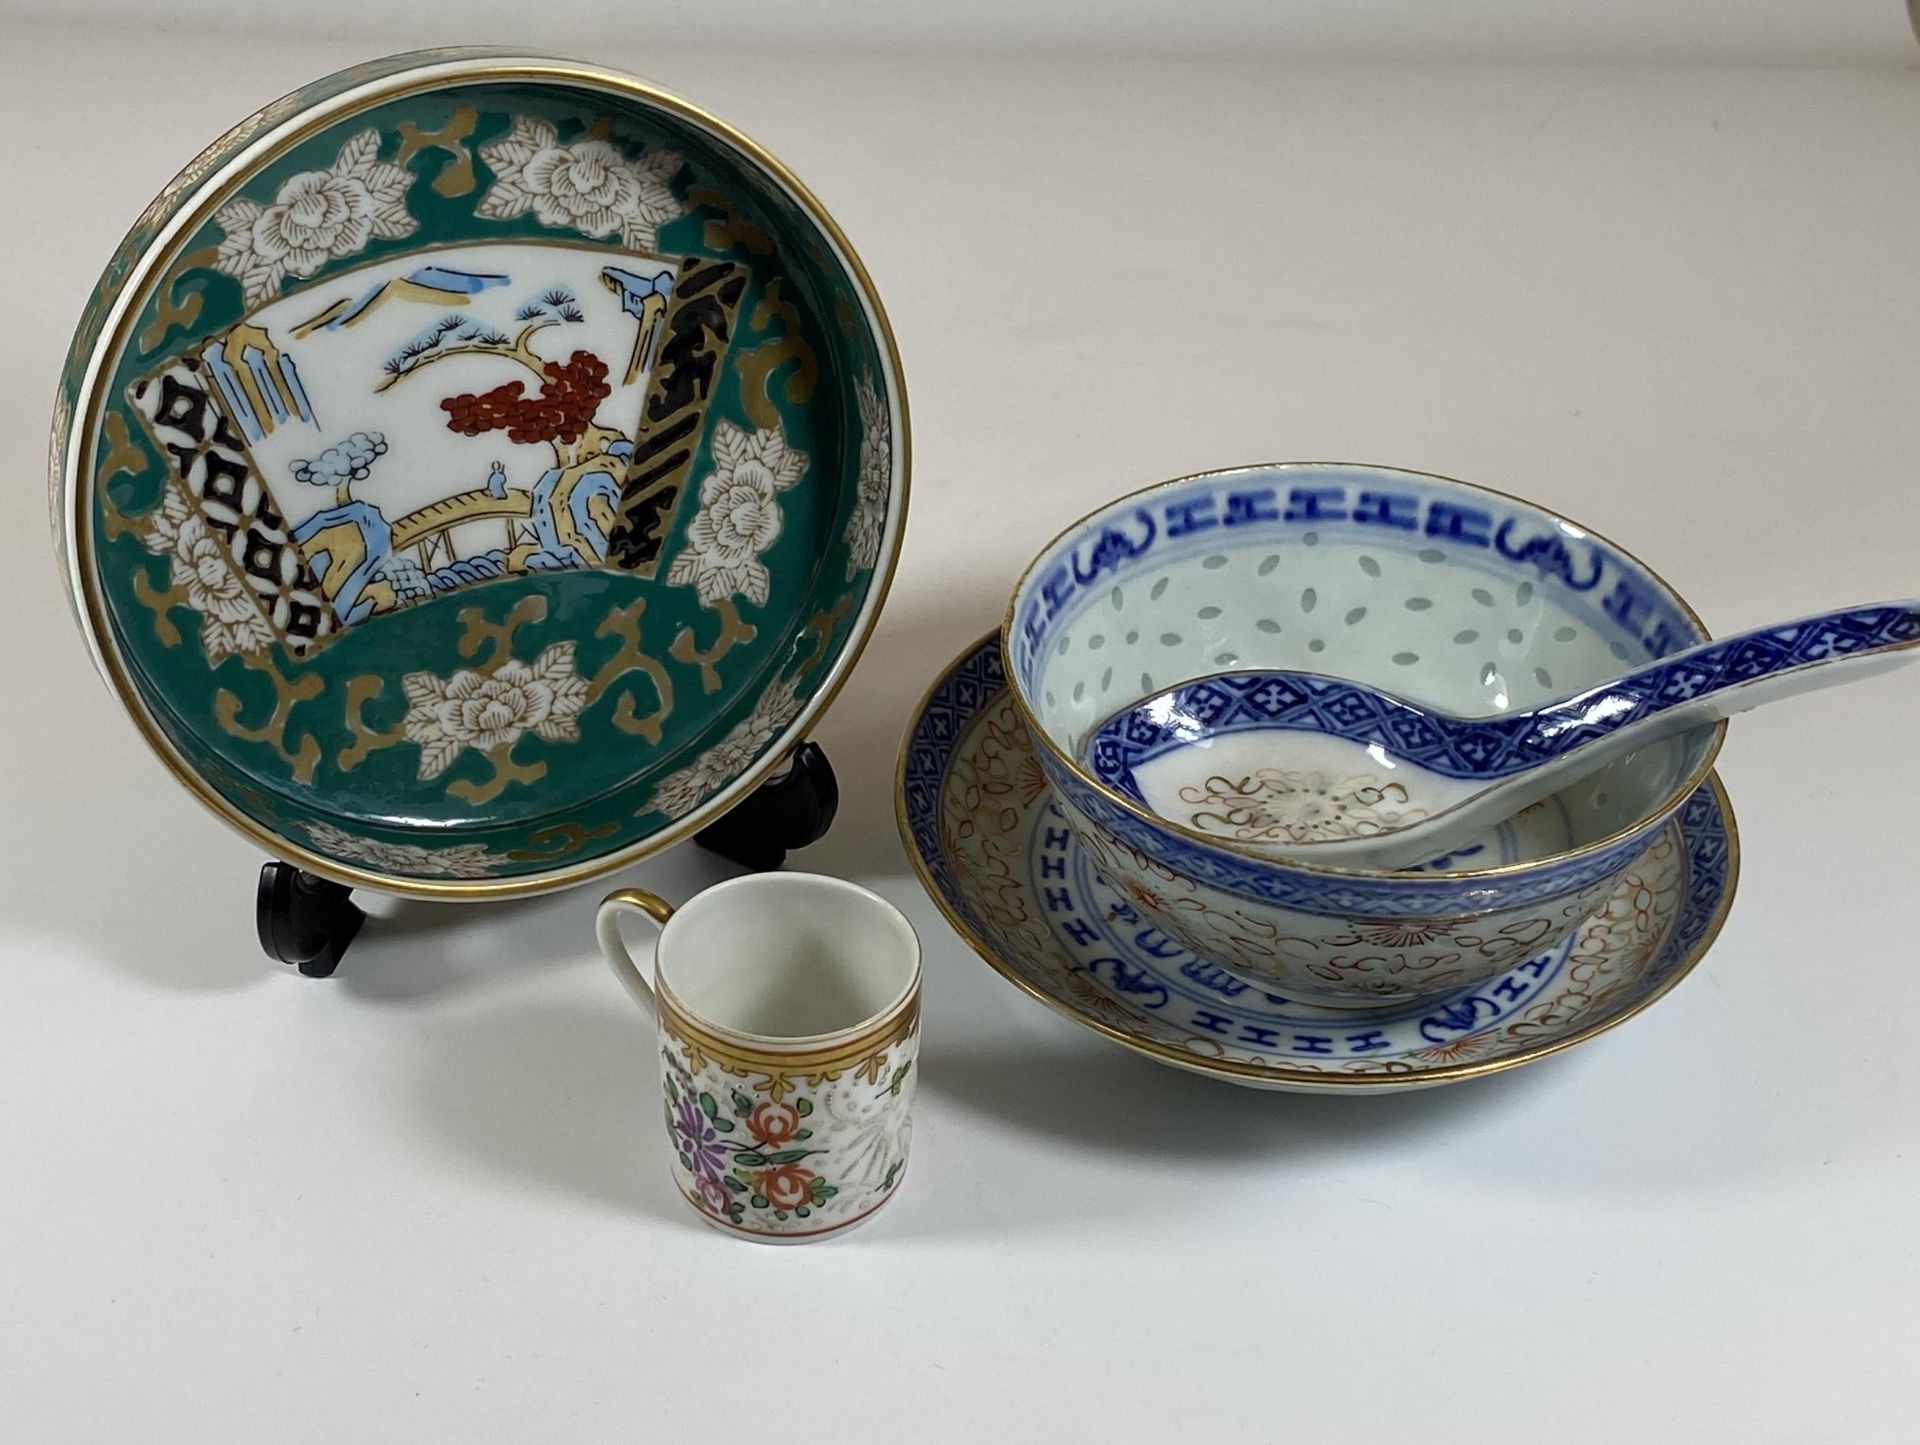 A GROUP OF ORIENTAL PORCELAIN, JAPANESE GOLD IMARI DISH, RICE DISH SET WITH DRAGON DESIGN AND